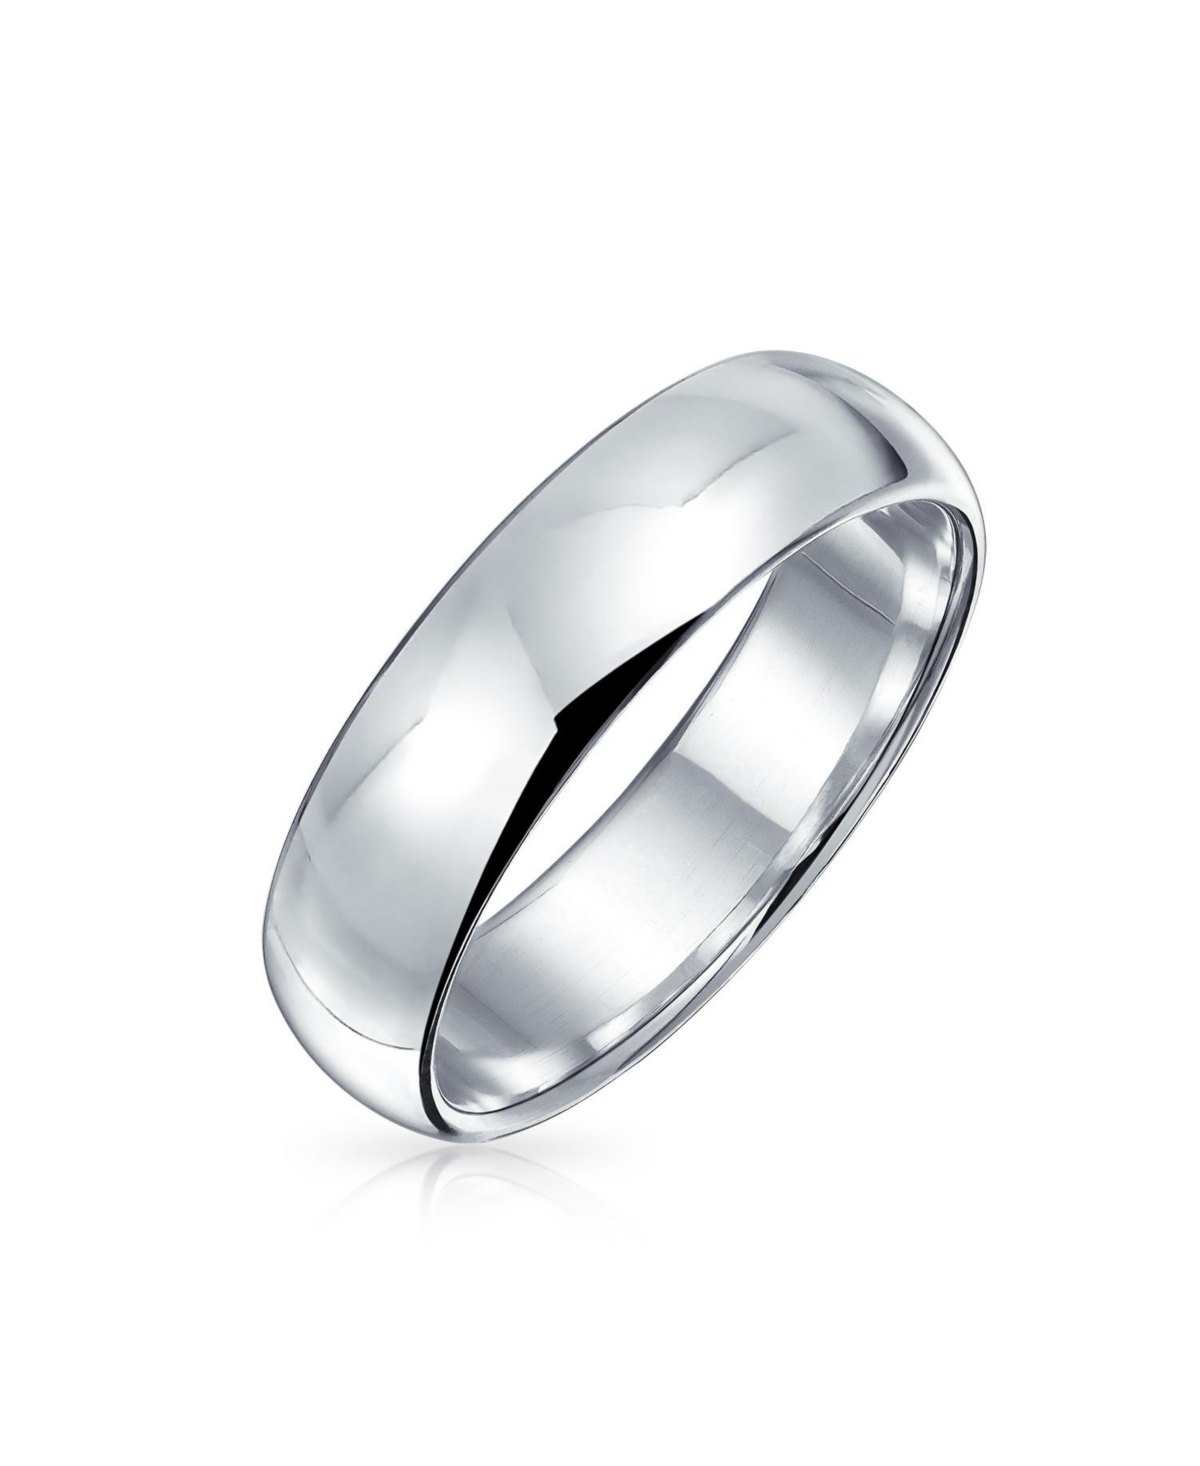 Minimalist Plain Simple .925 Sterling Silver Dome Couples Wedding Band Ring For Women For Men 5MM - Silver